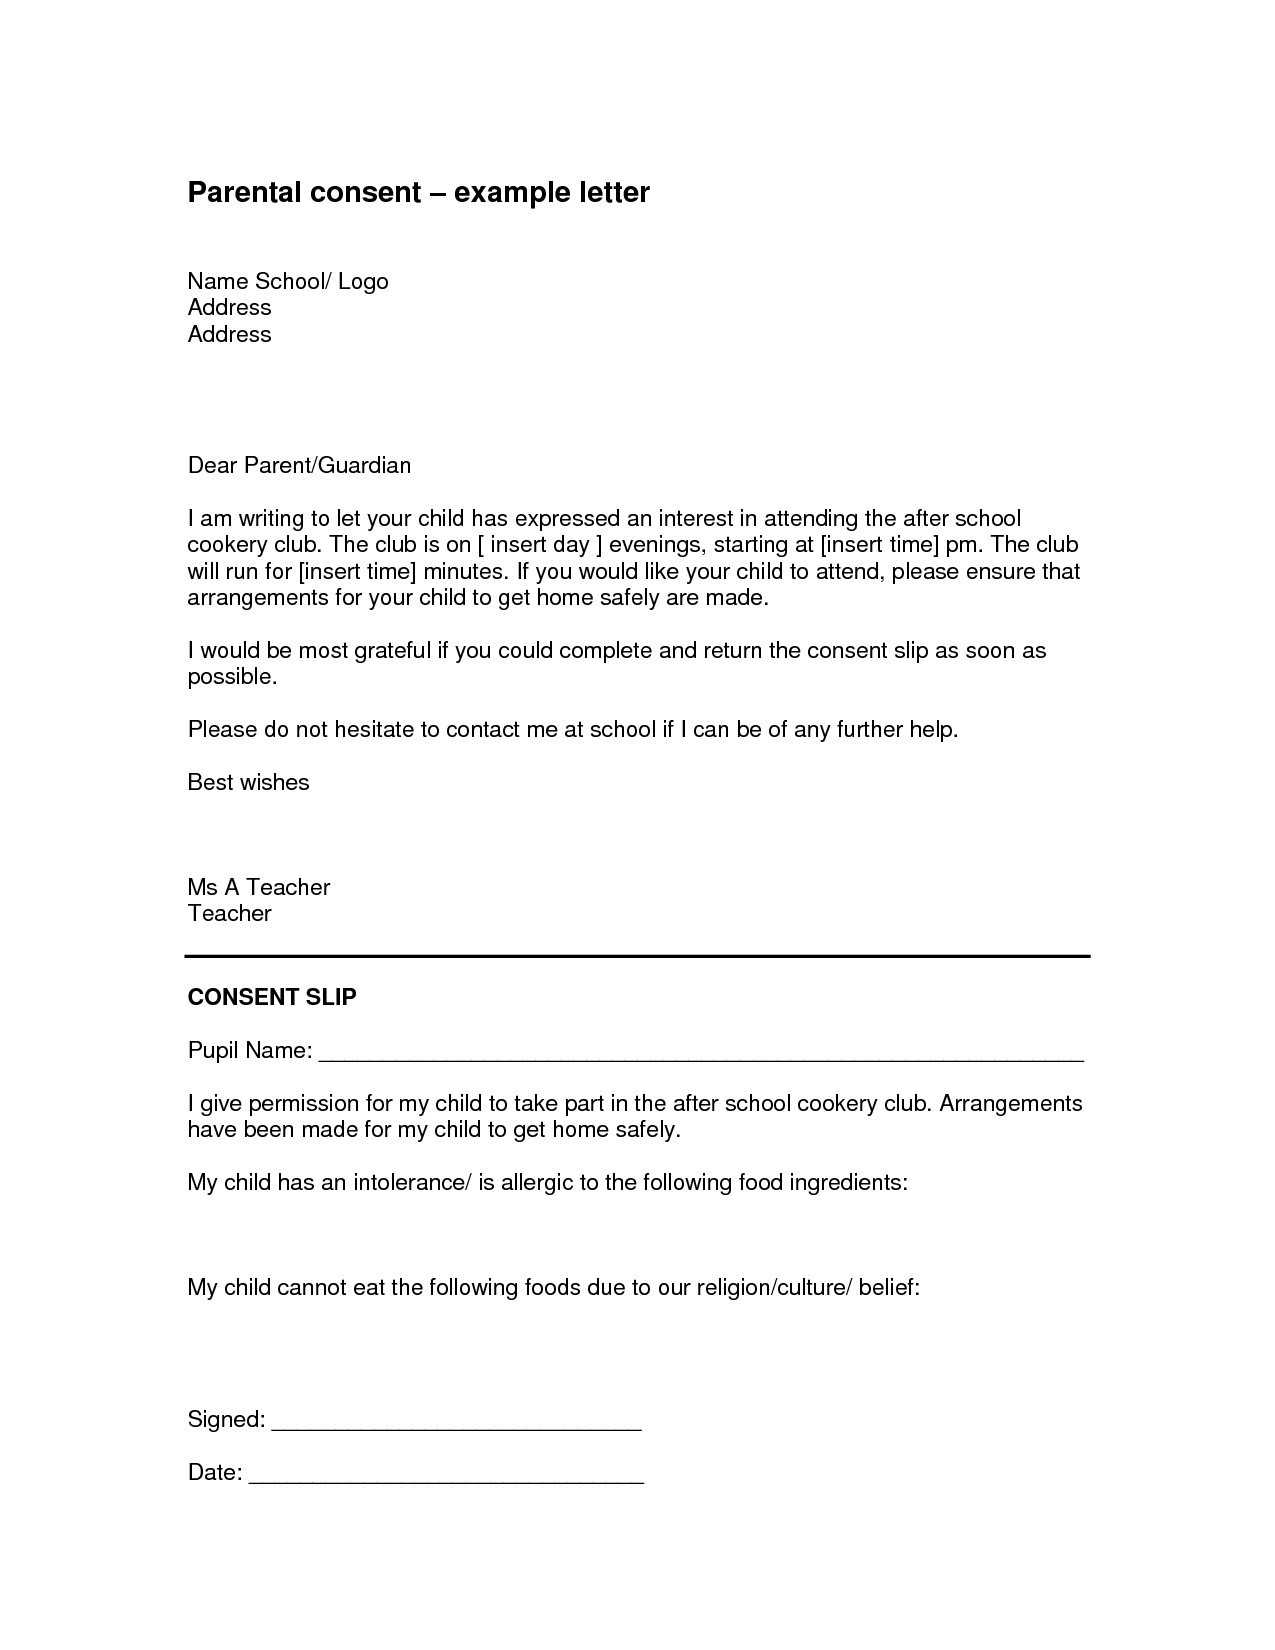 Notarized Travel Consent Letter Template - Sample Permission Letter to Travel Best Notarized Letter